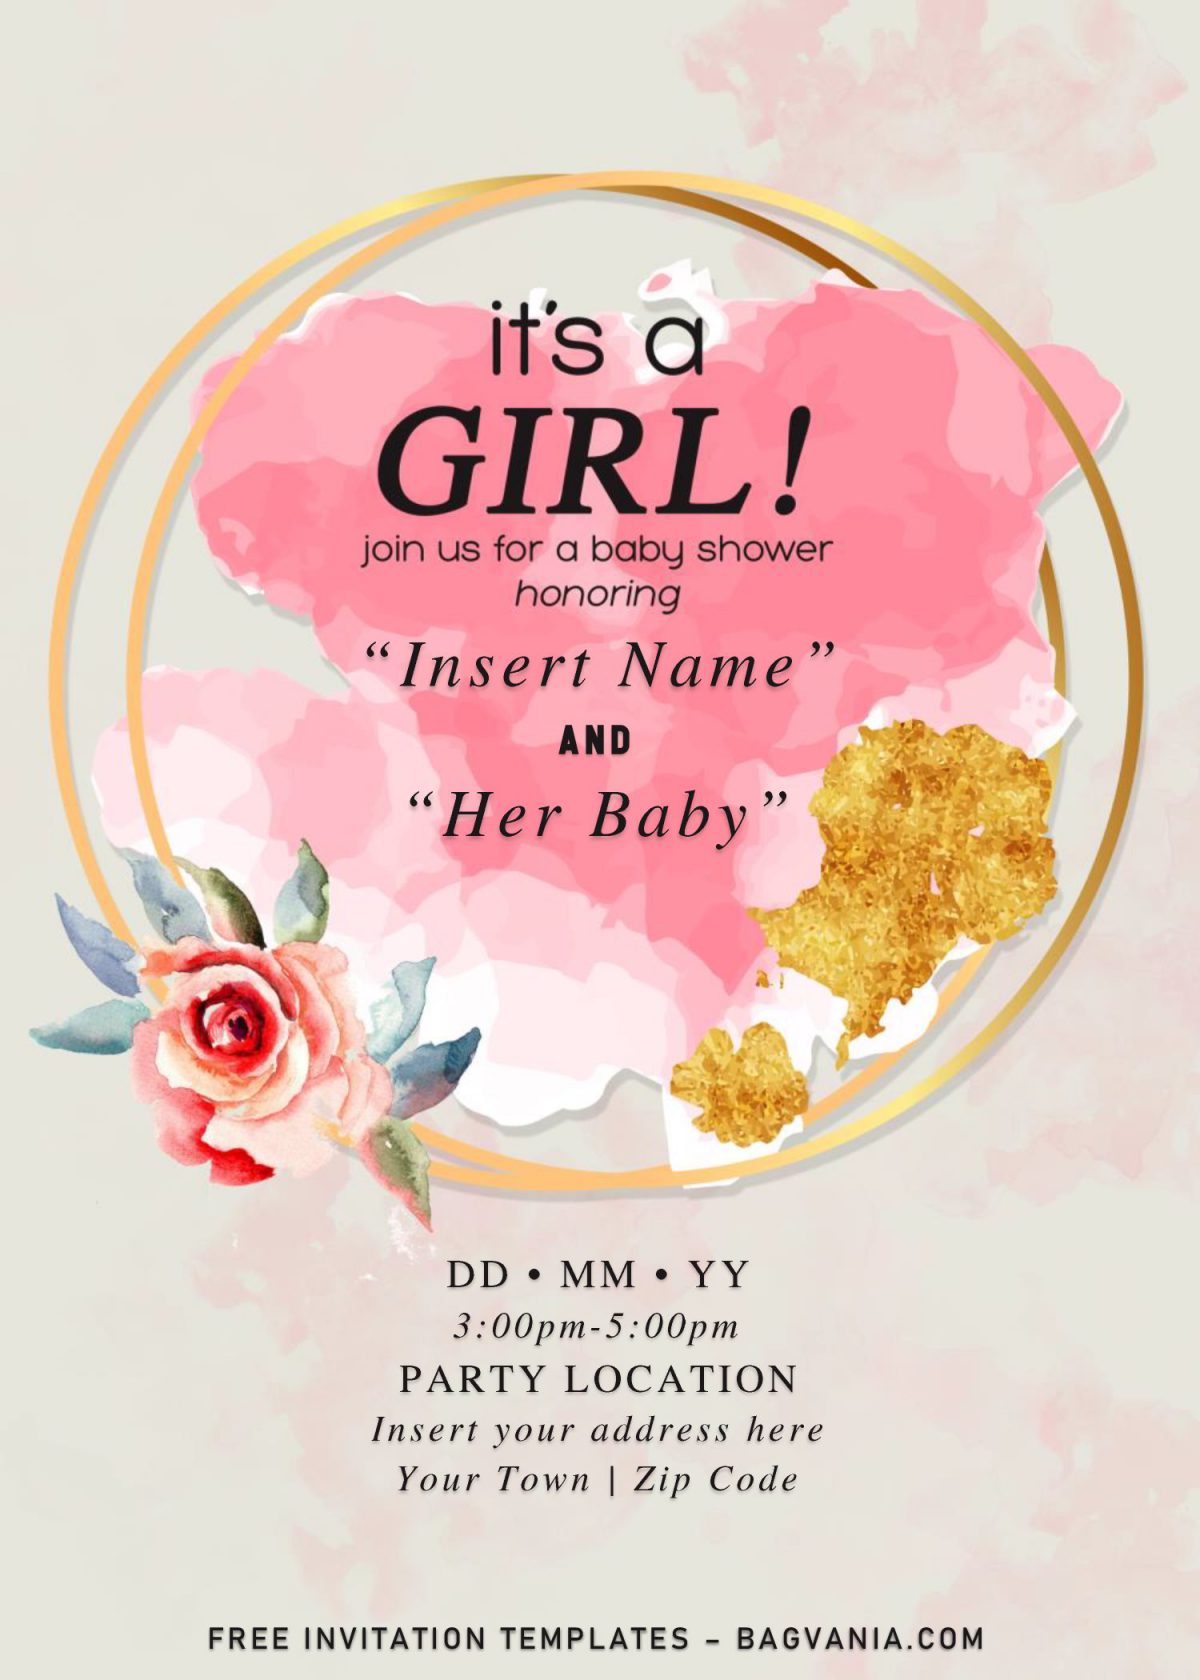 Free Gold Glitter Girl Baby Shower Invitation Templates For Word and has gold glitter splatter and blush pink roses